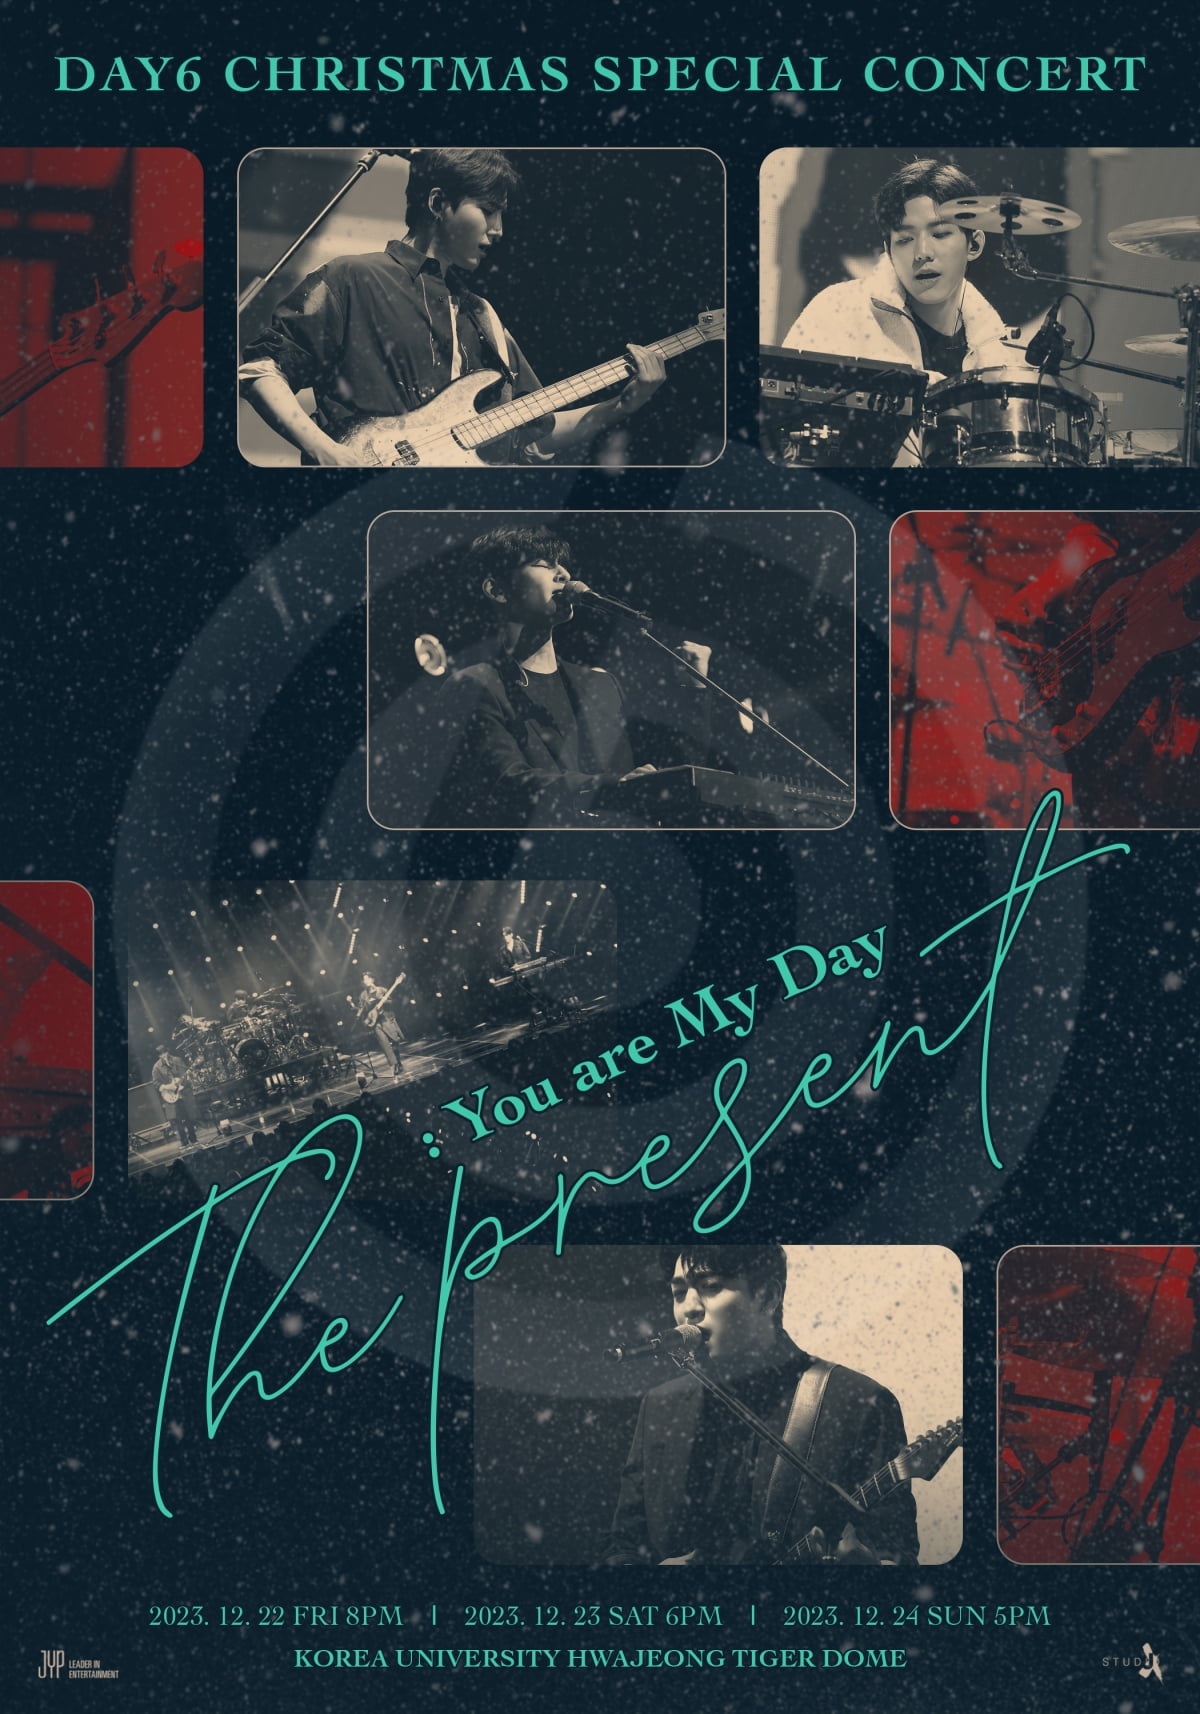 DAY6 holds exclusive Christmas concert for the first time in about 4 years